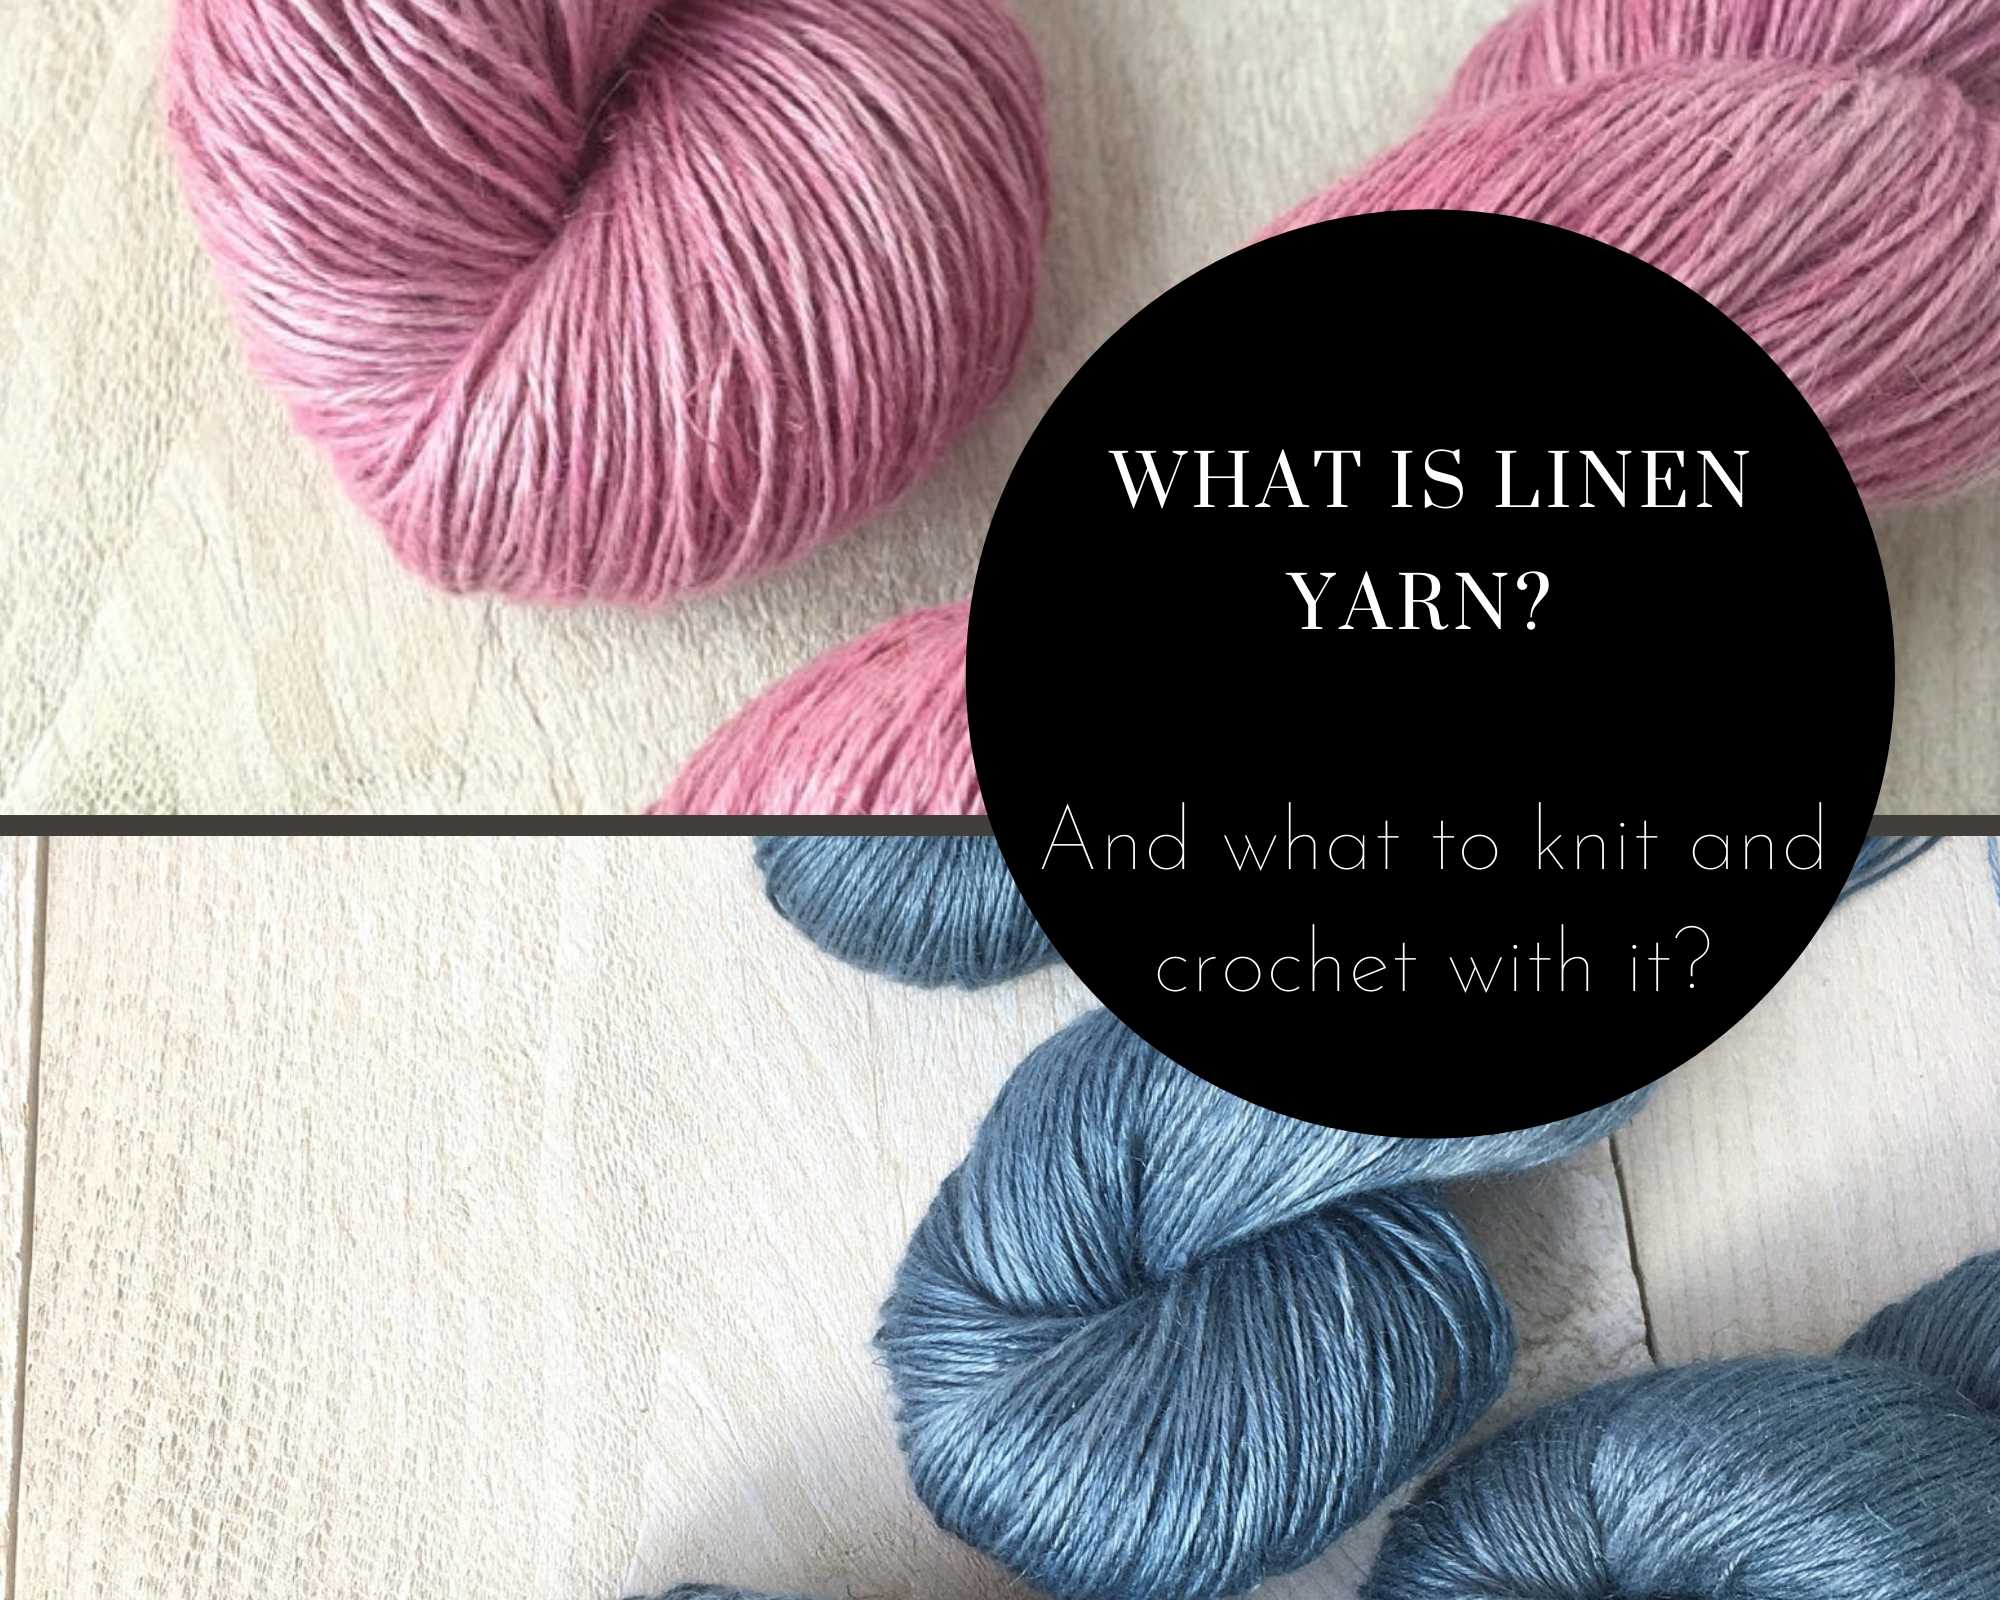 Knitting with linen yarn